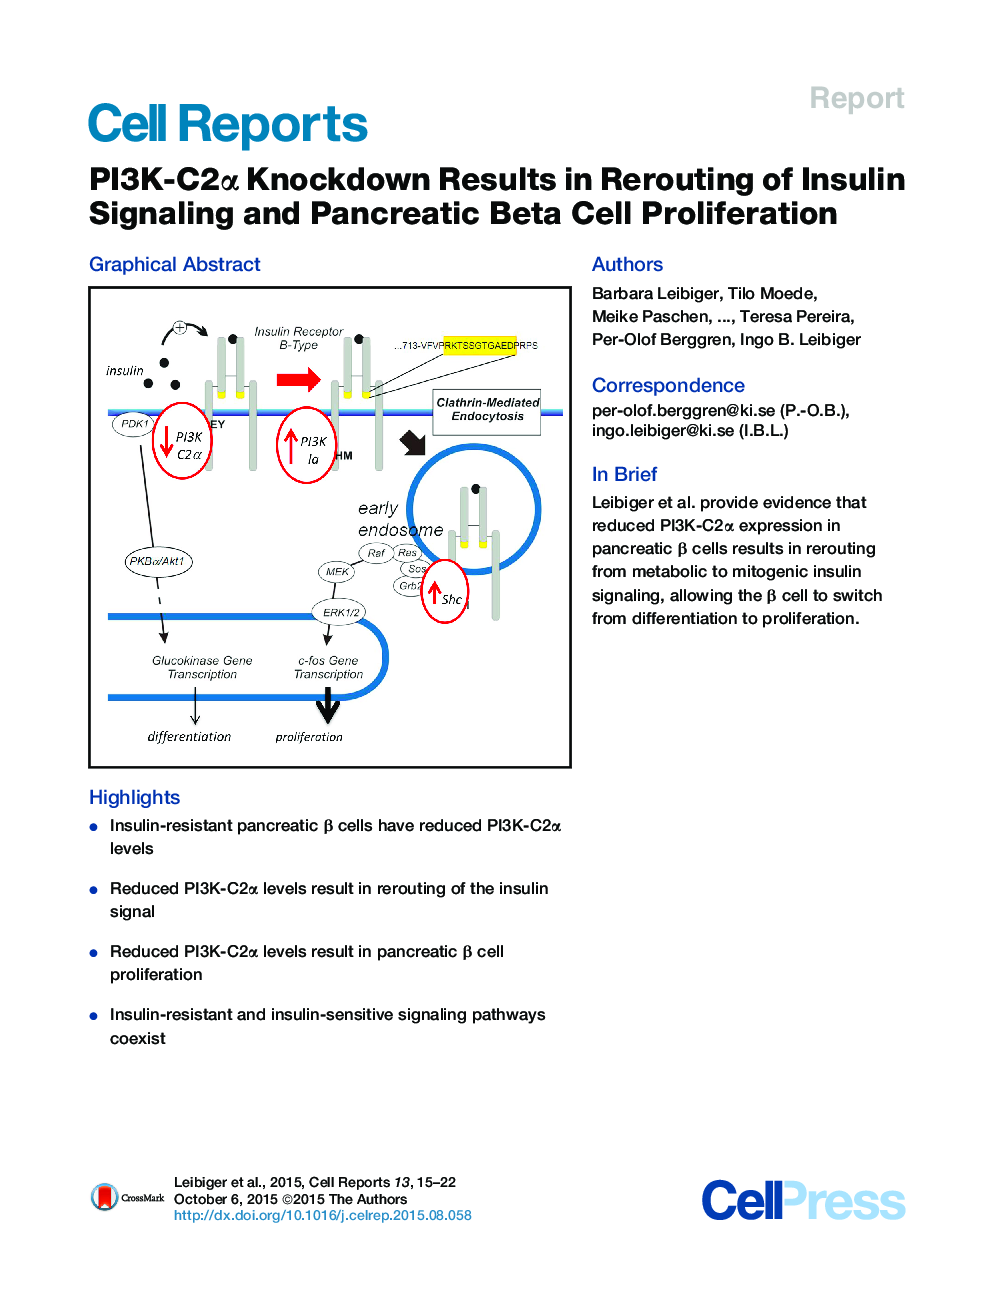 PI3K-C2α Knockdown Results in Rerouting of Insulin Signaling and Pancreatic Beta Cell Proliferation 